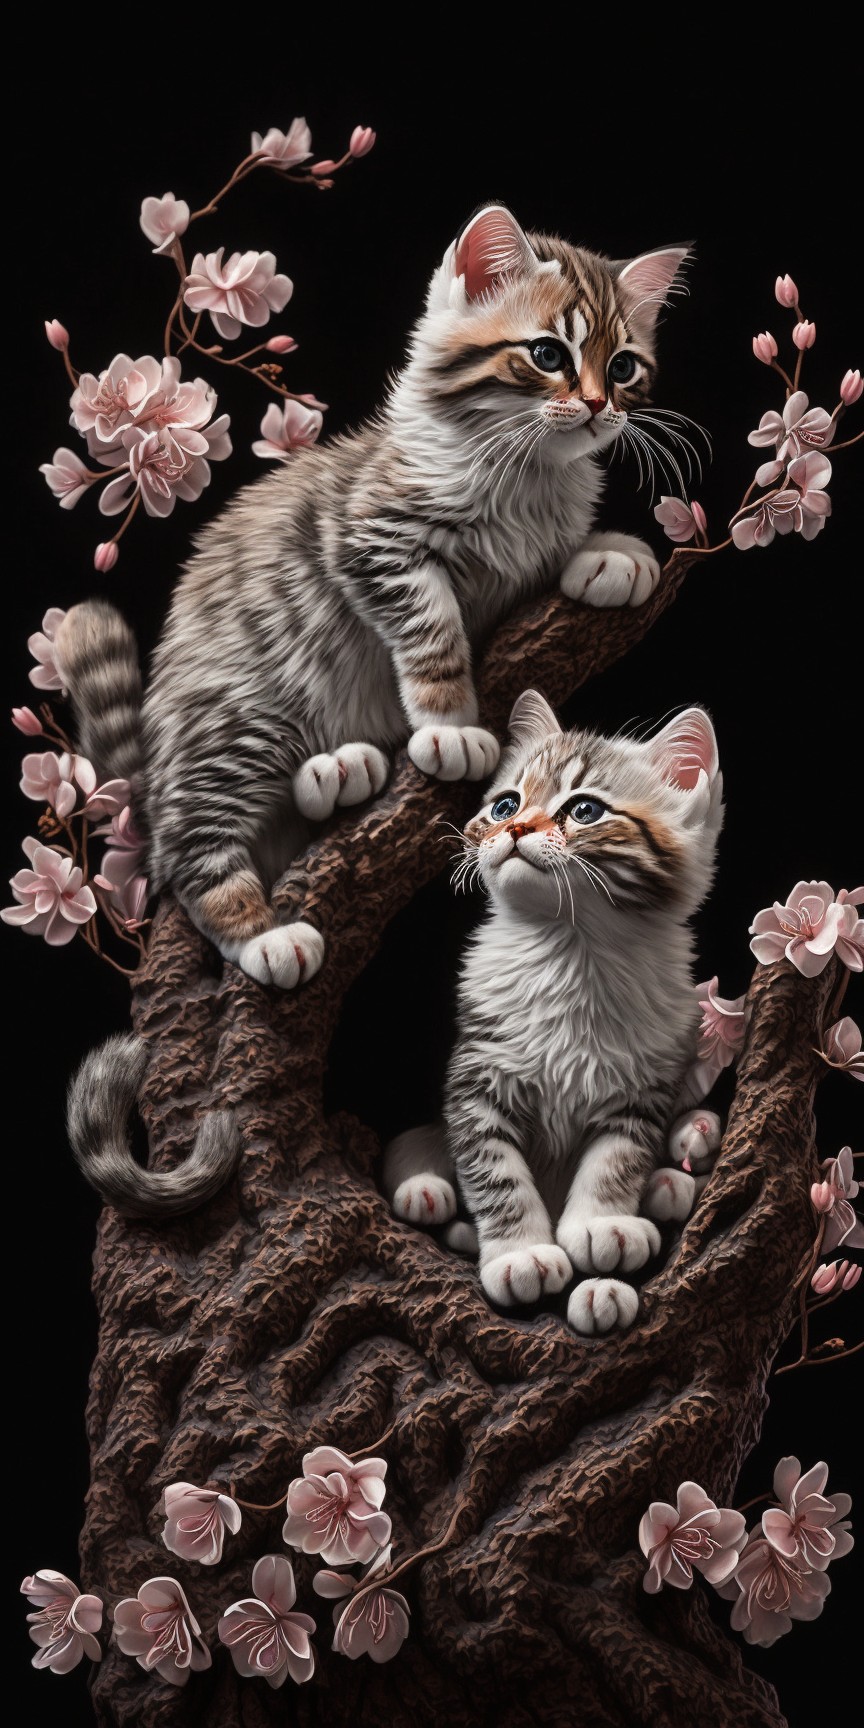 Two kittens on the cherry blossom tree